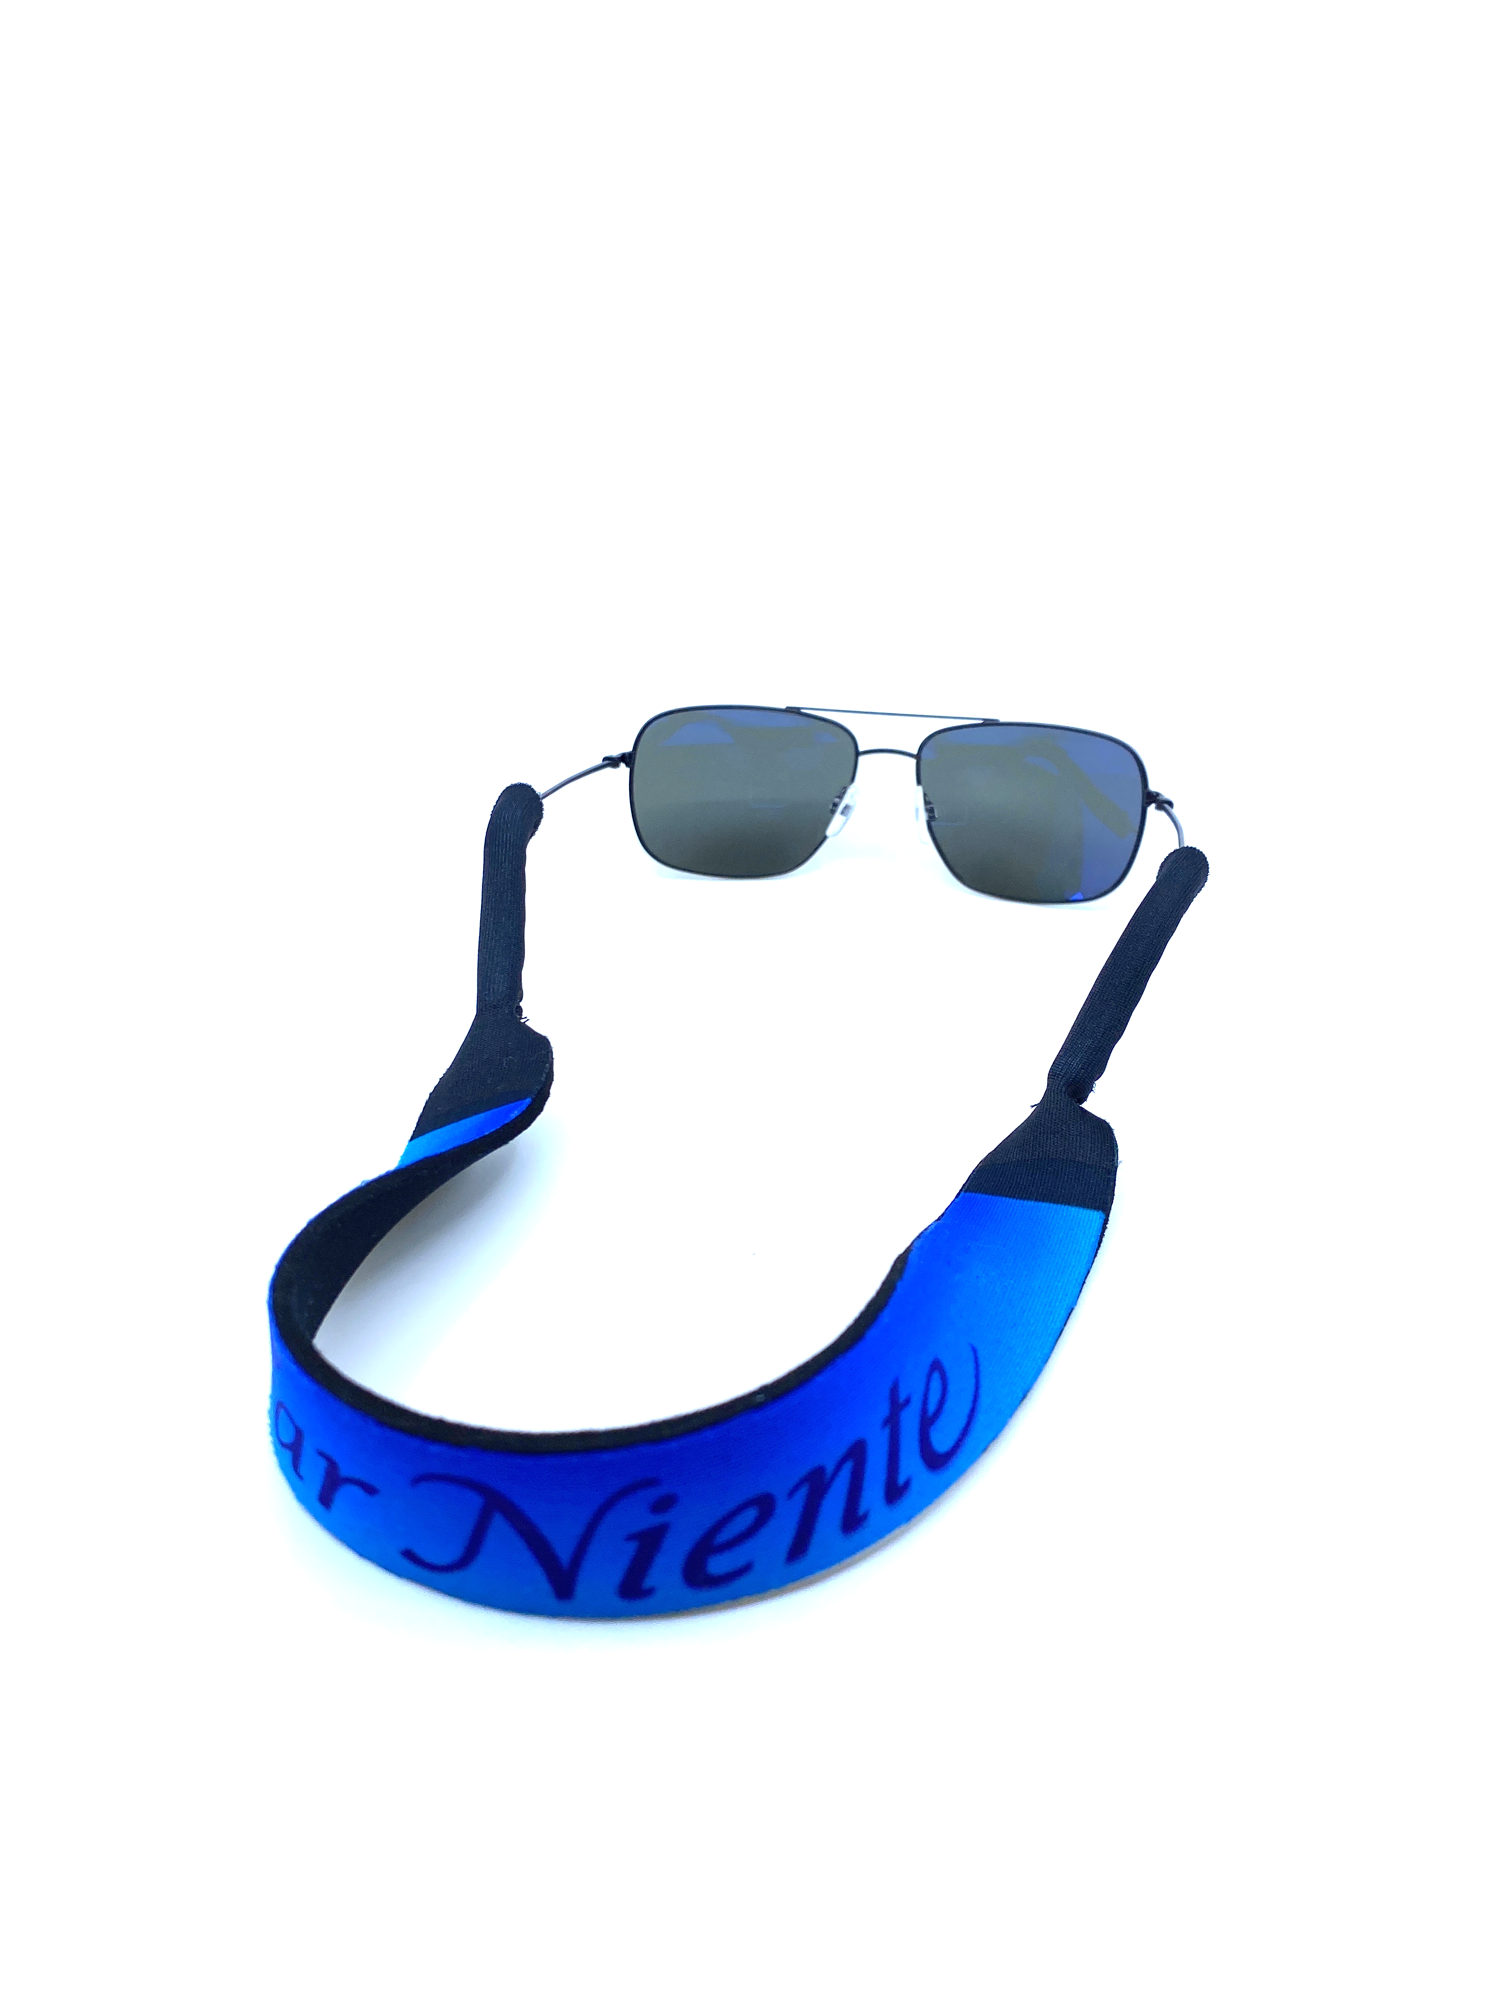 Custom croakies made with sublimation printing